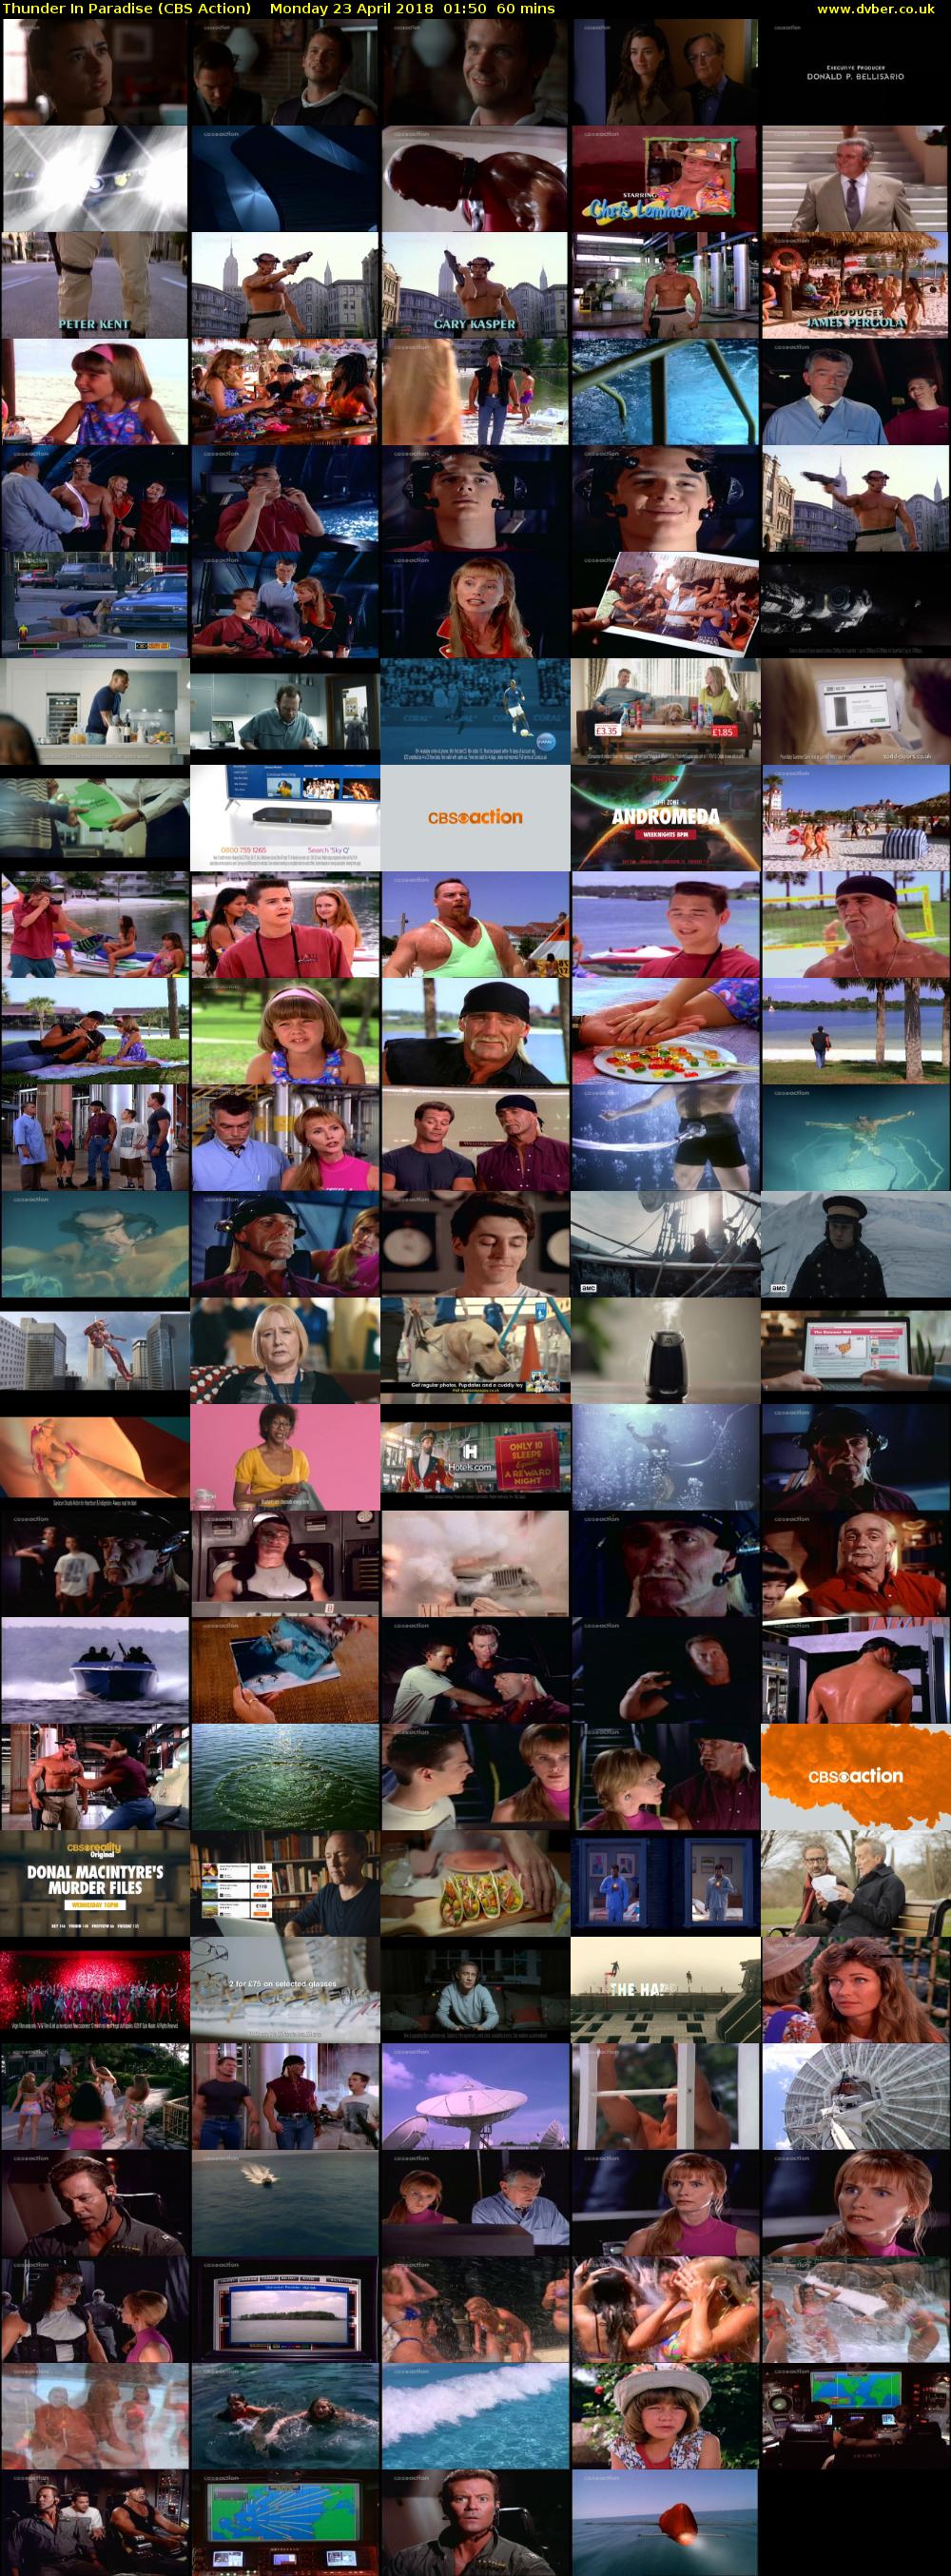 Thunder In Paradise (CBS Action) Monday 23 April 2018 01:50 - 02:50